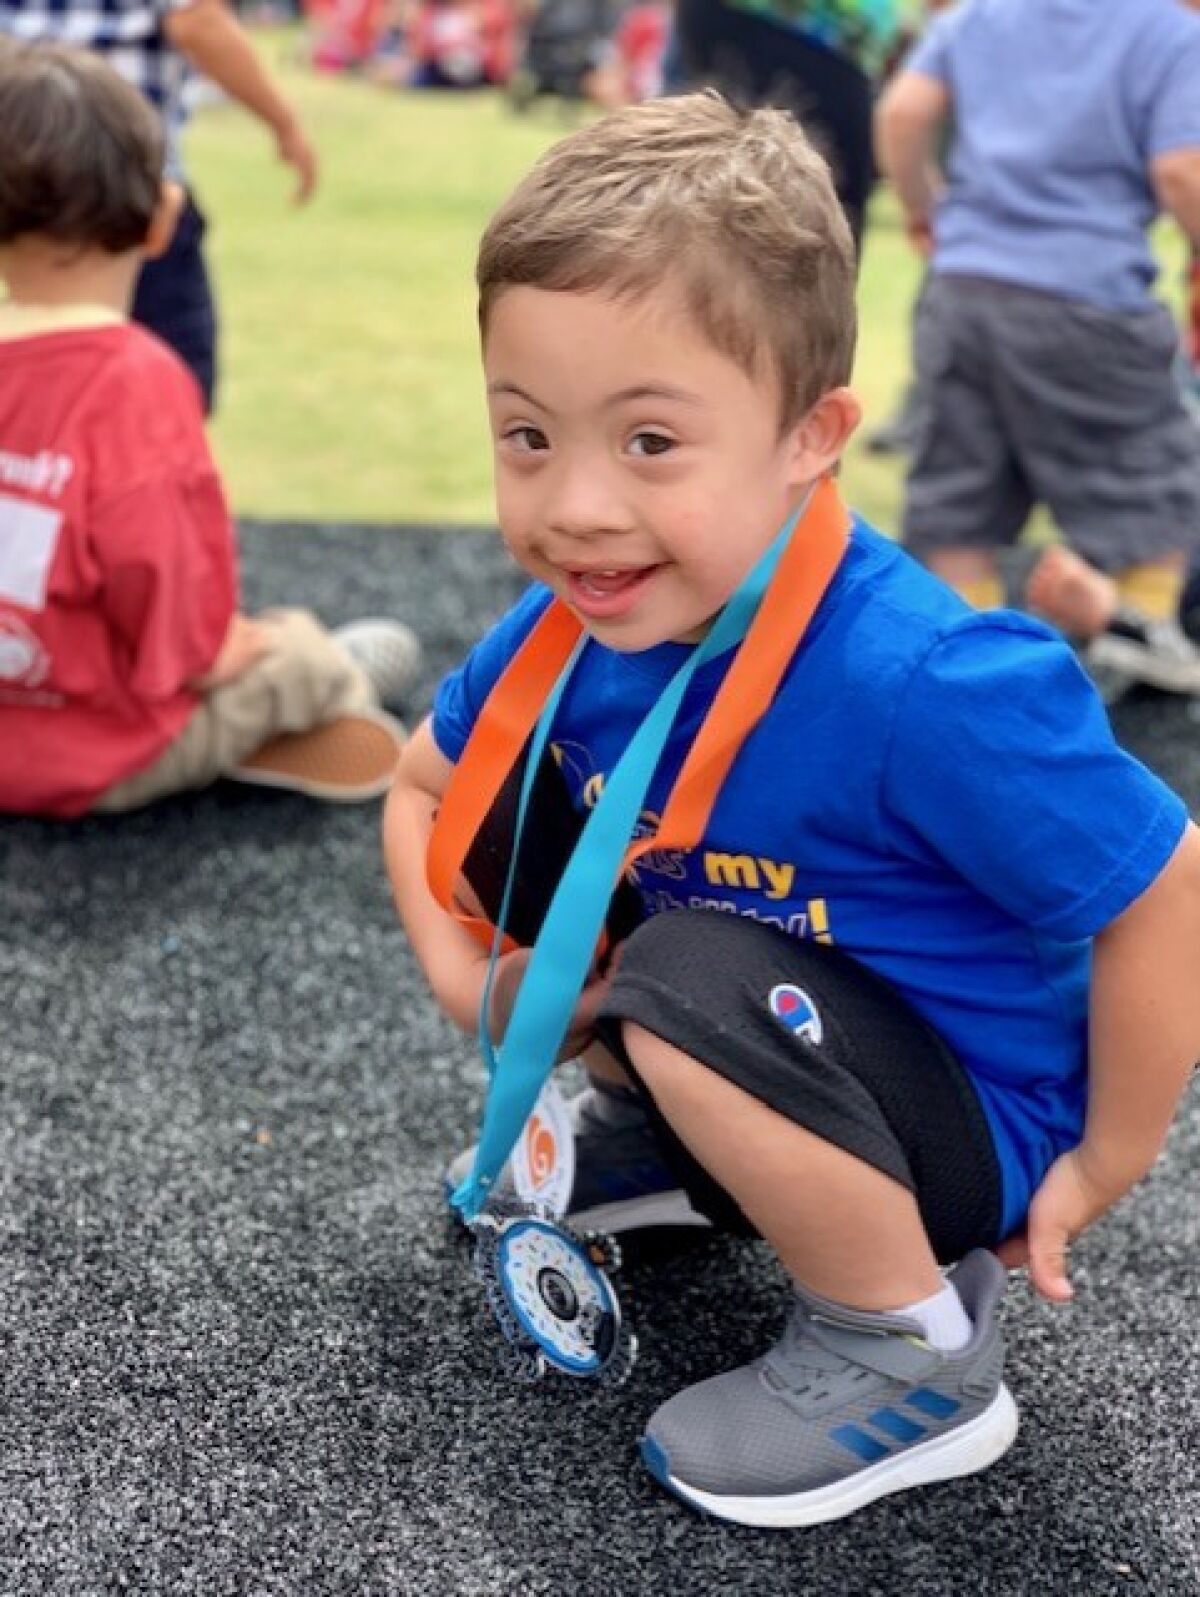 Jennifer Candelario's son Mateo at a previous San Diego Donut Run. The family has participated every year since 2018.